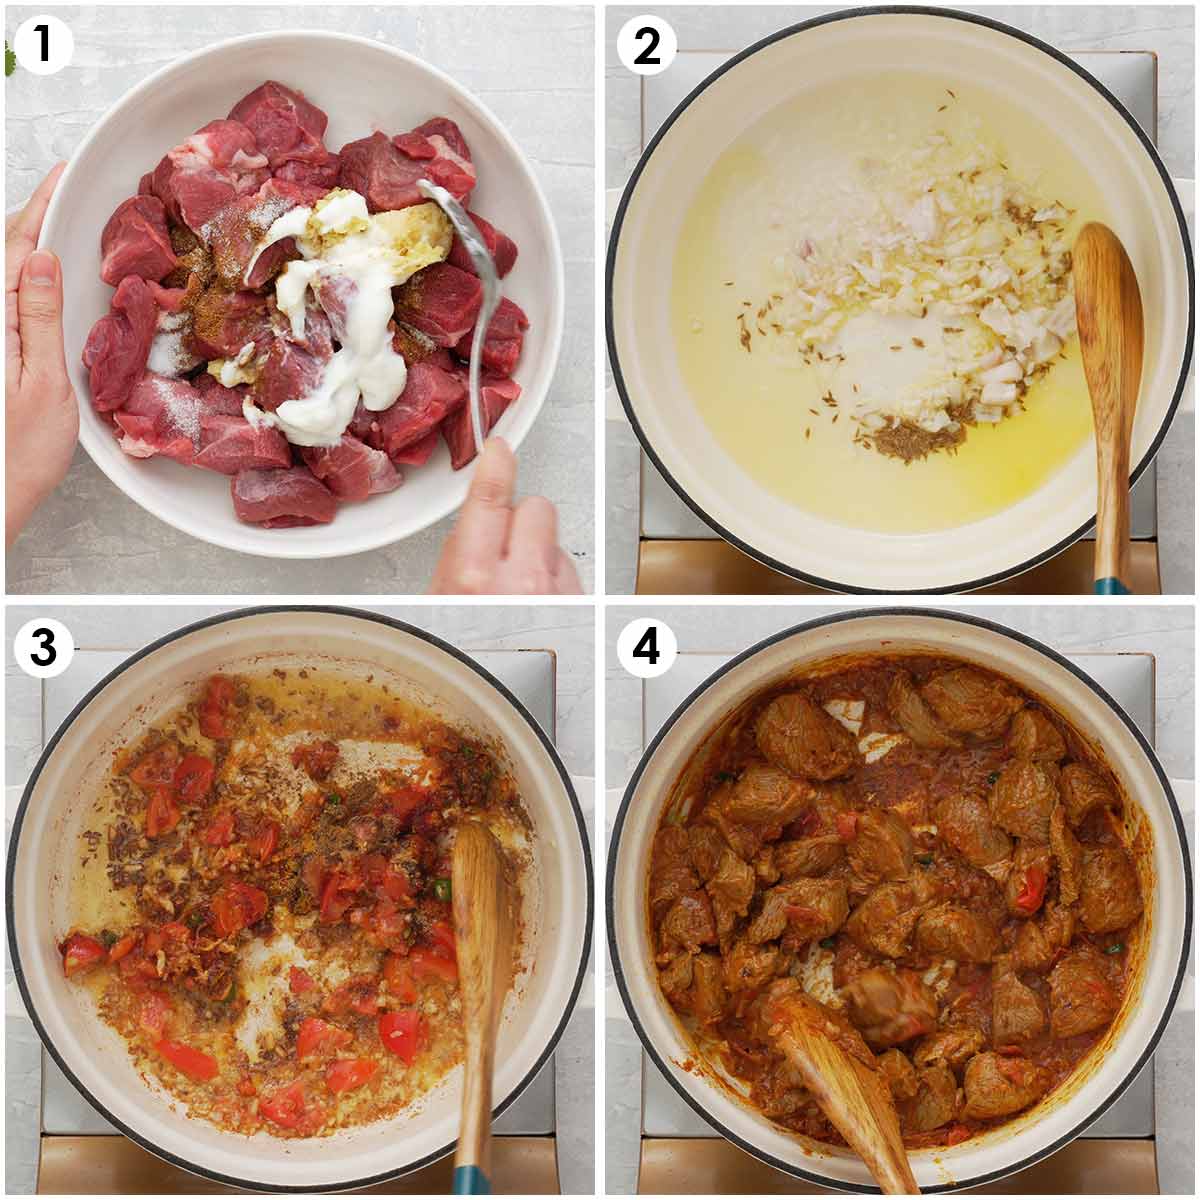 4 image collage showing how to marinate lamb and how to prepare karahi curry sauce with tomatoes. 